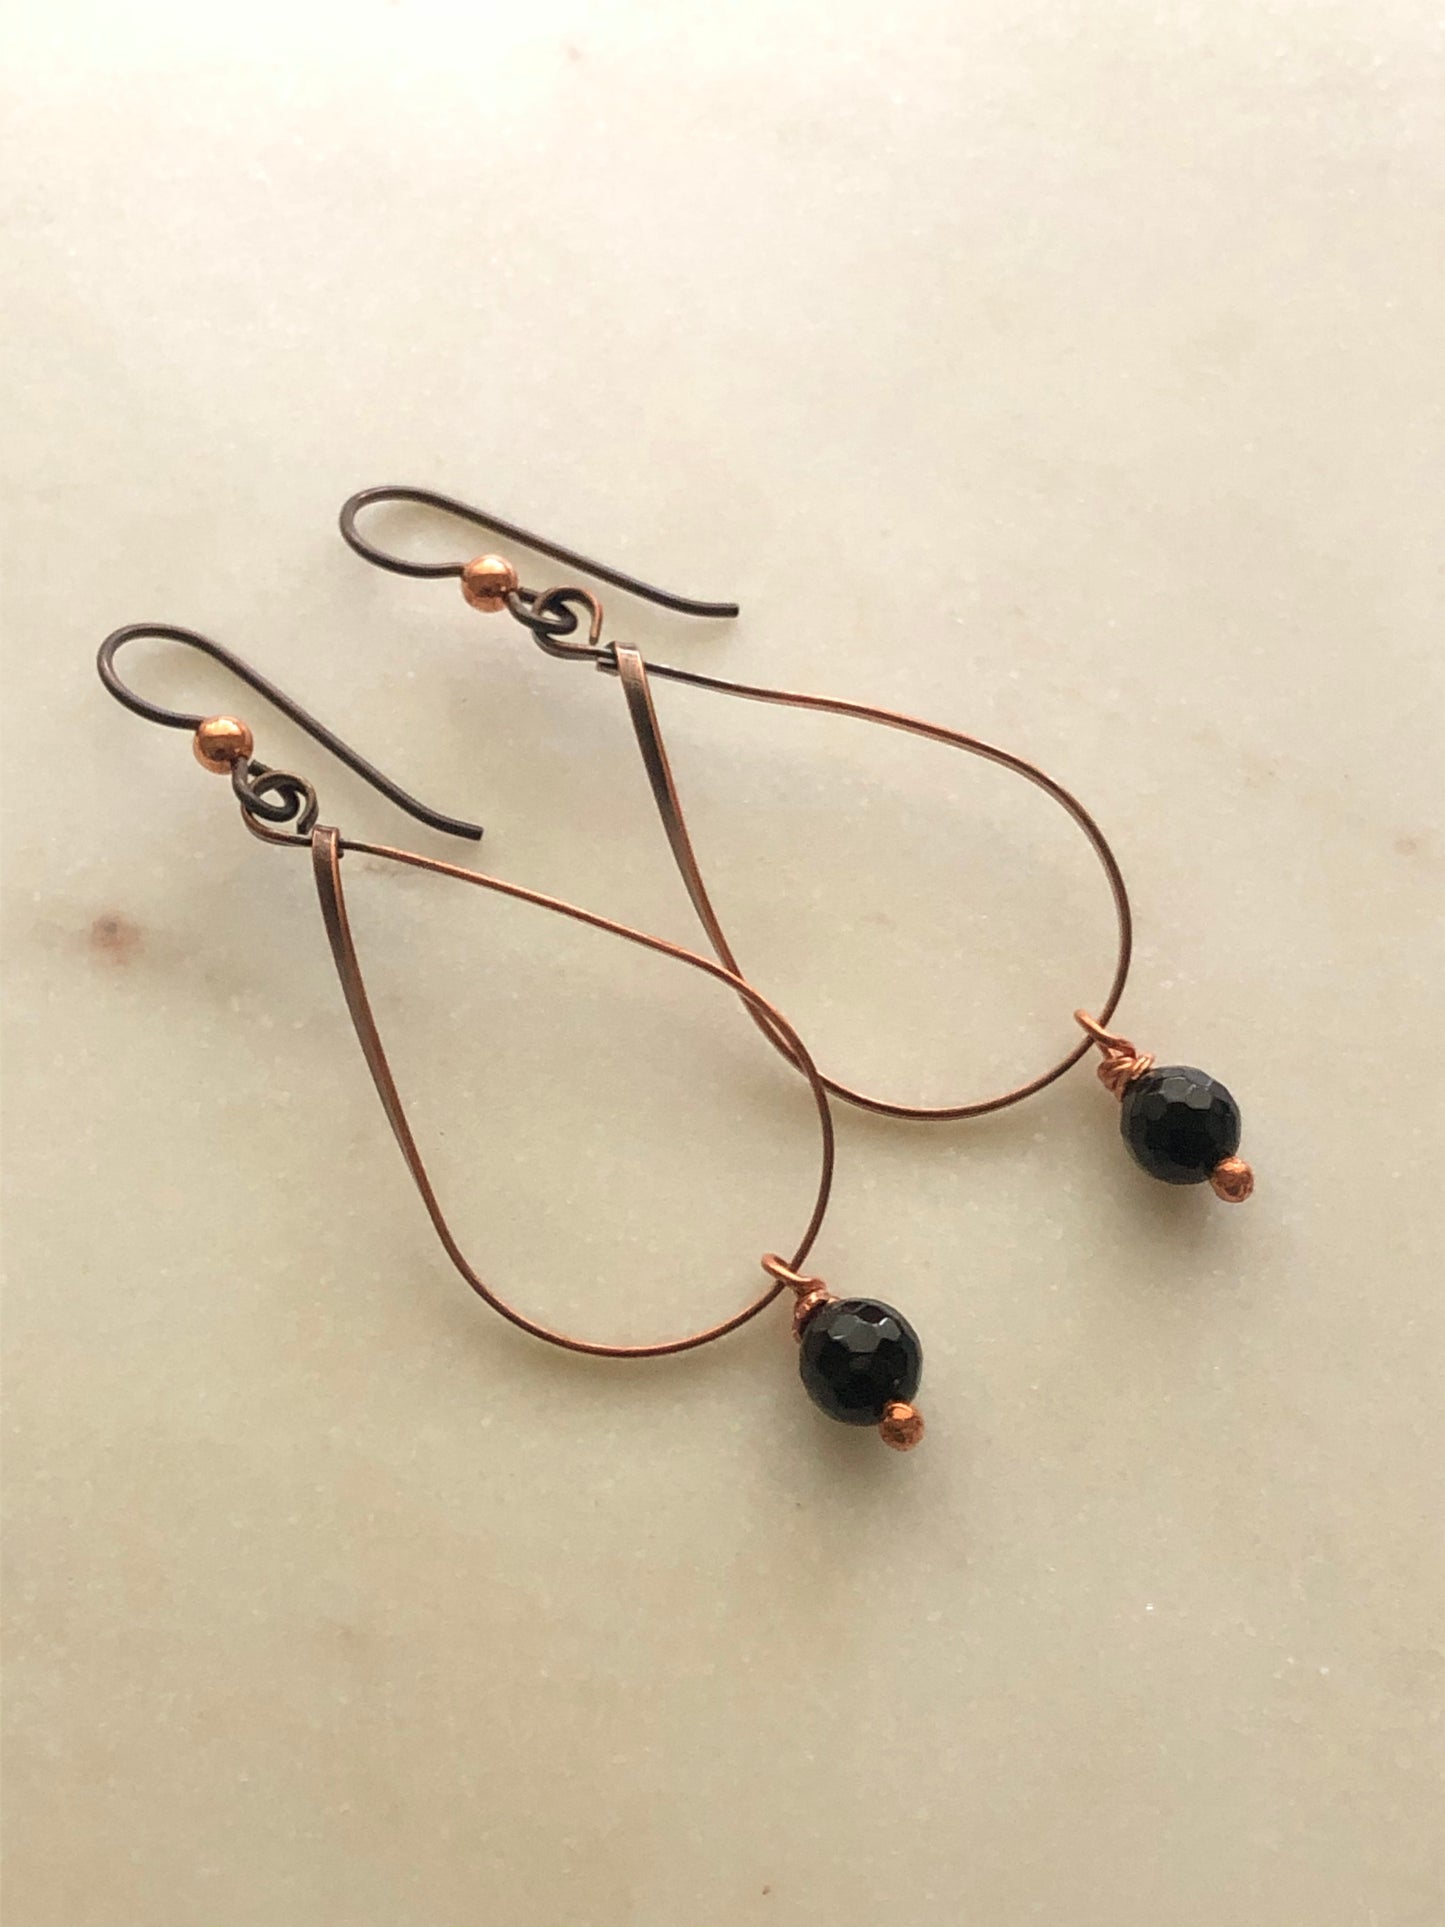 Copper wire wrapped earrings with onyx gemstones